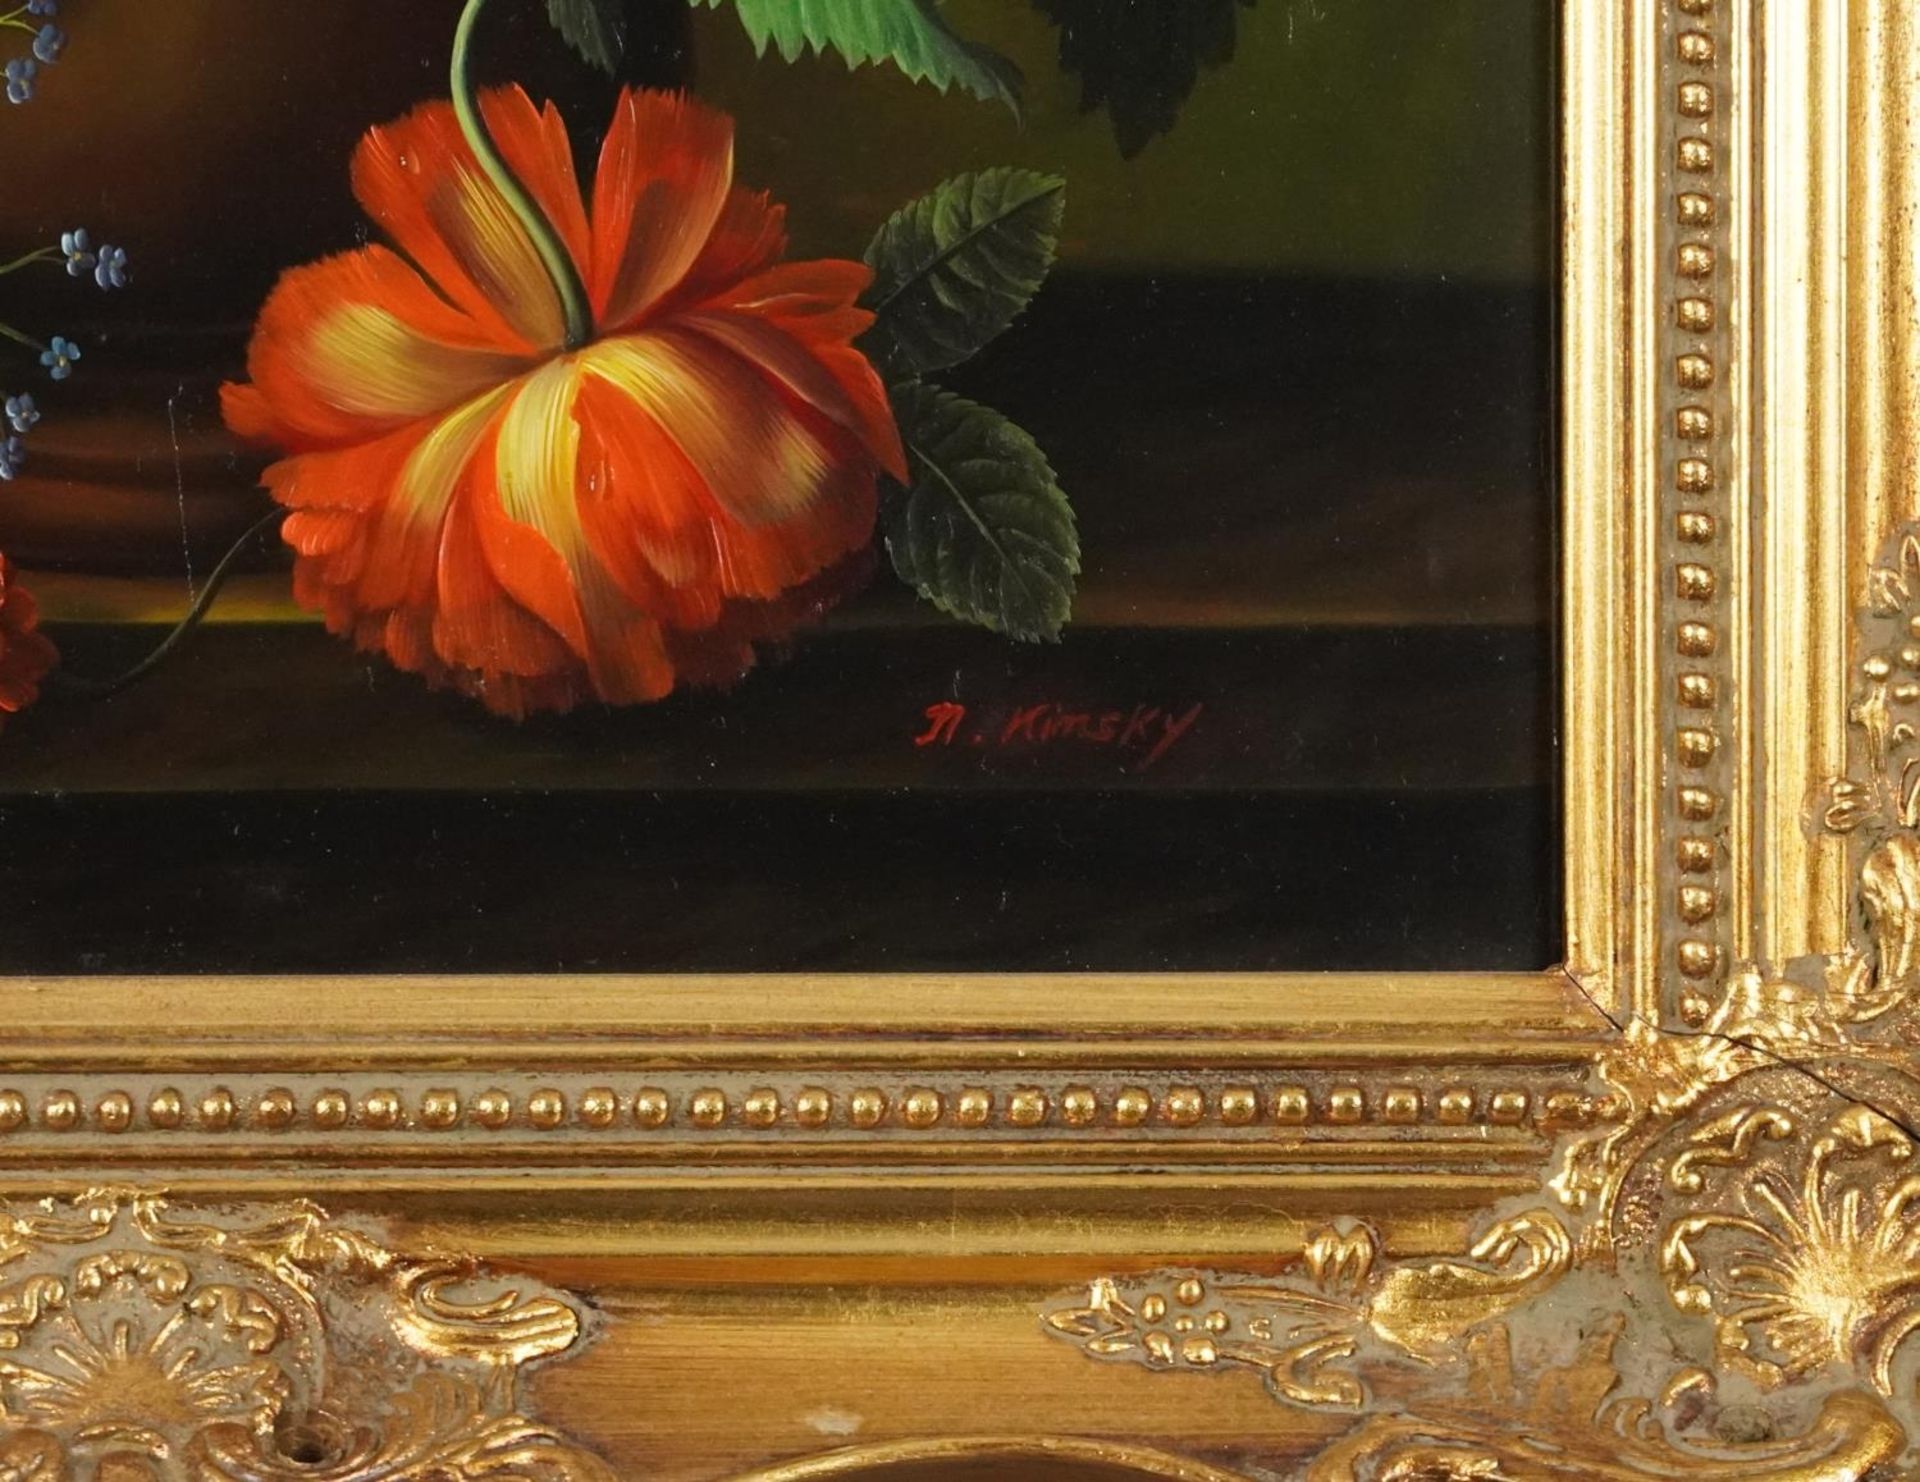 N Kinsky - Still life flowers in a vase, Old Master style oil on wood panel, mounted and framed, - Image 3 of 6